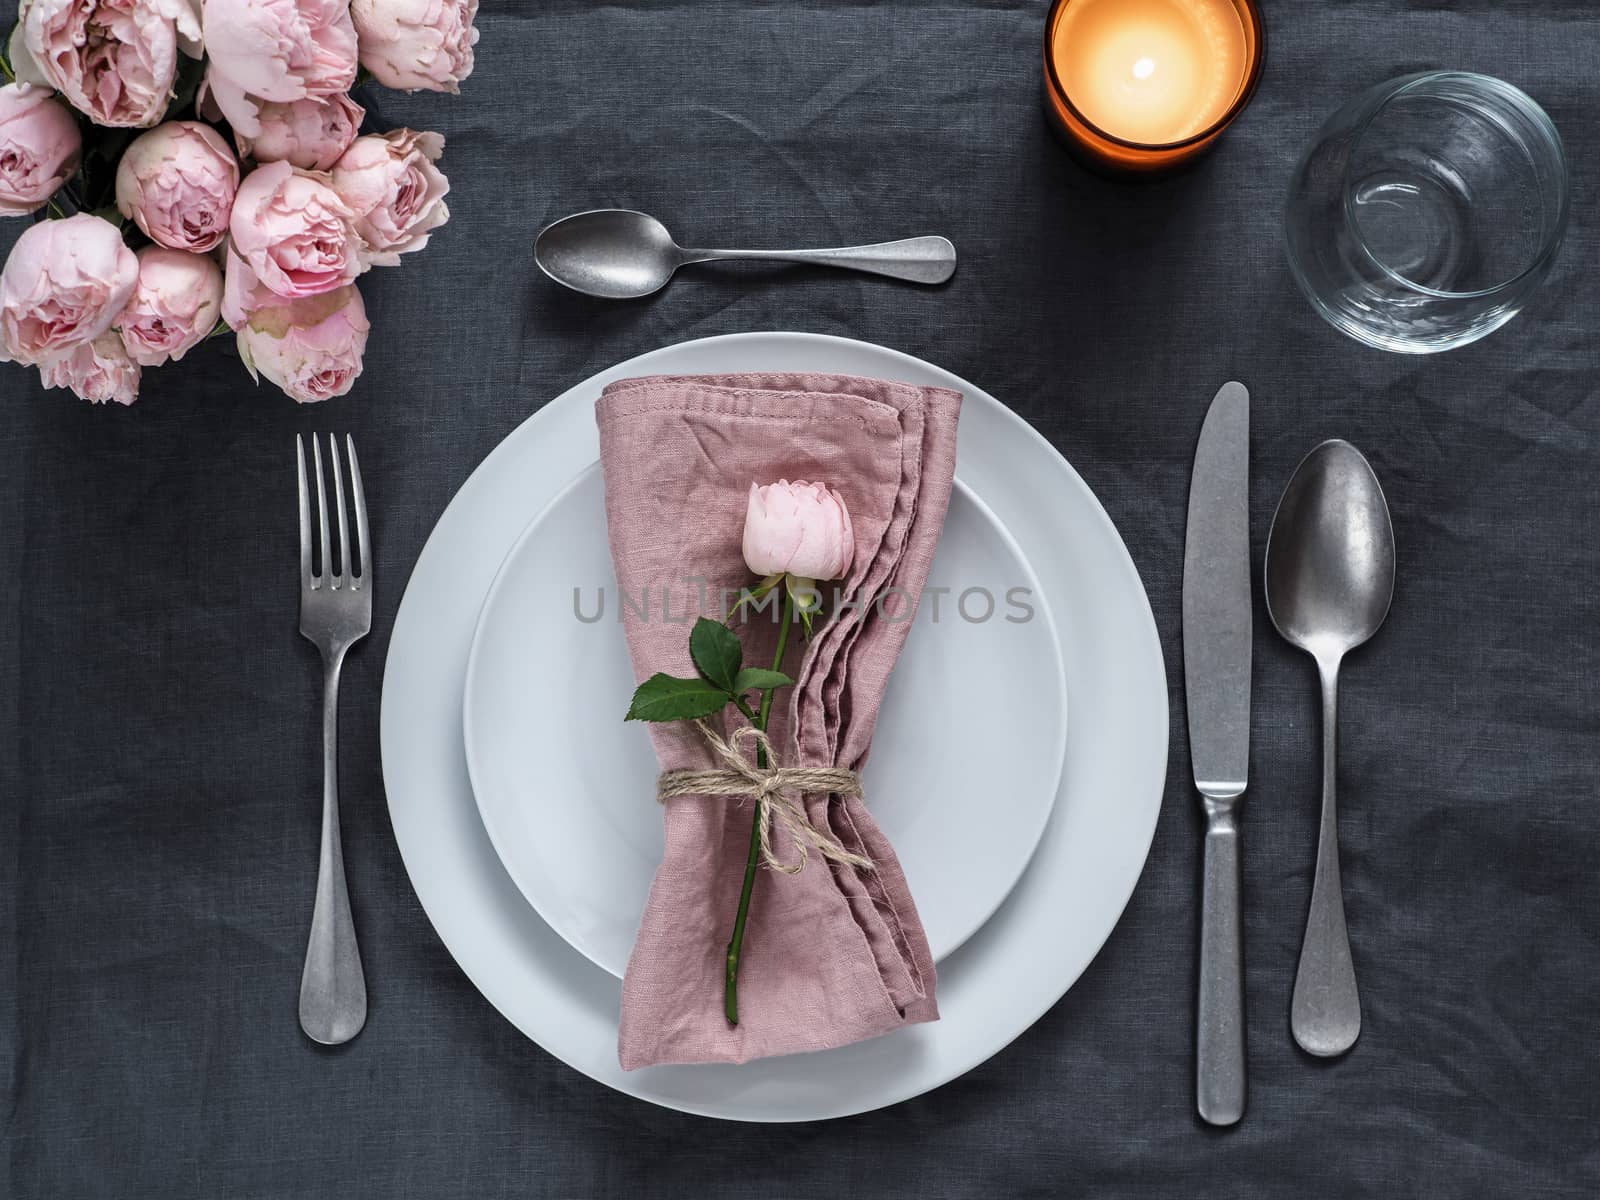 Beautiful table setting on gray linen tablecloth by fascinadora